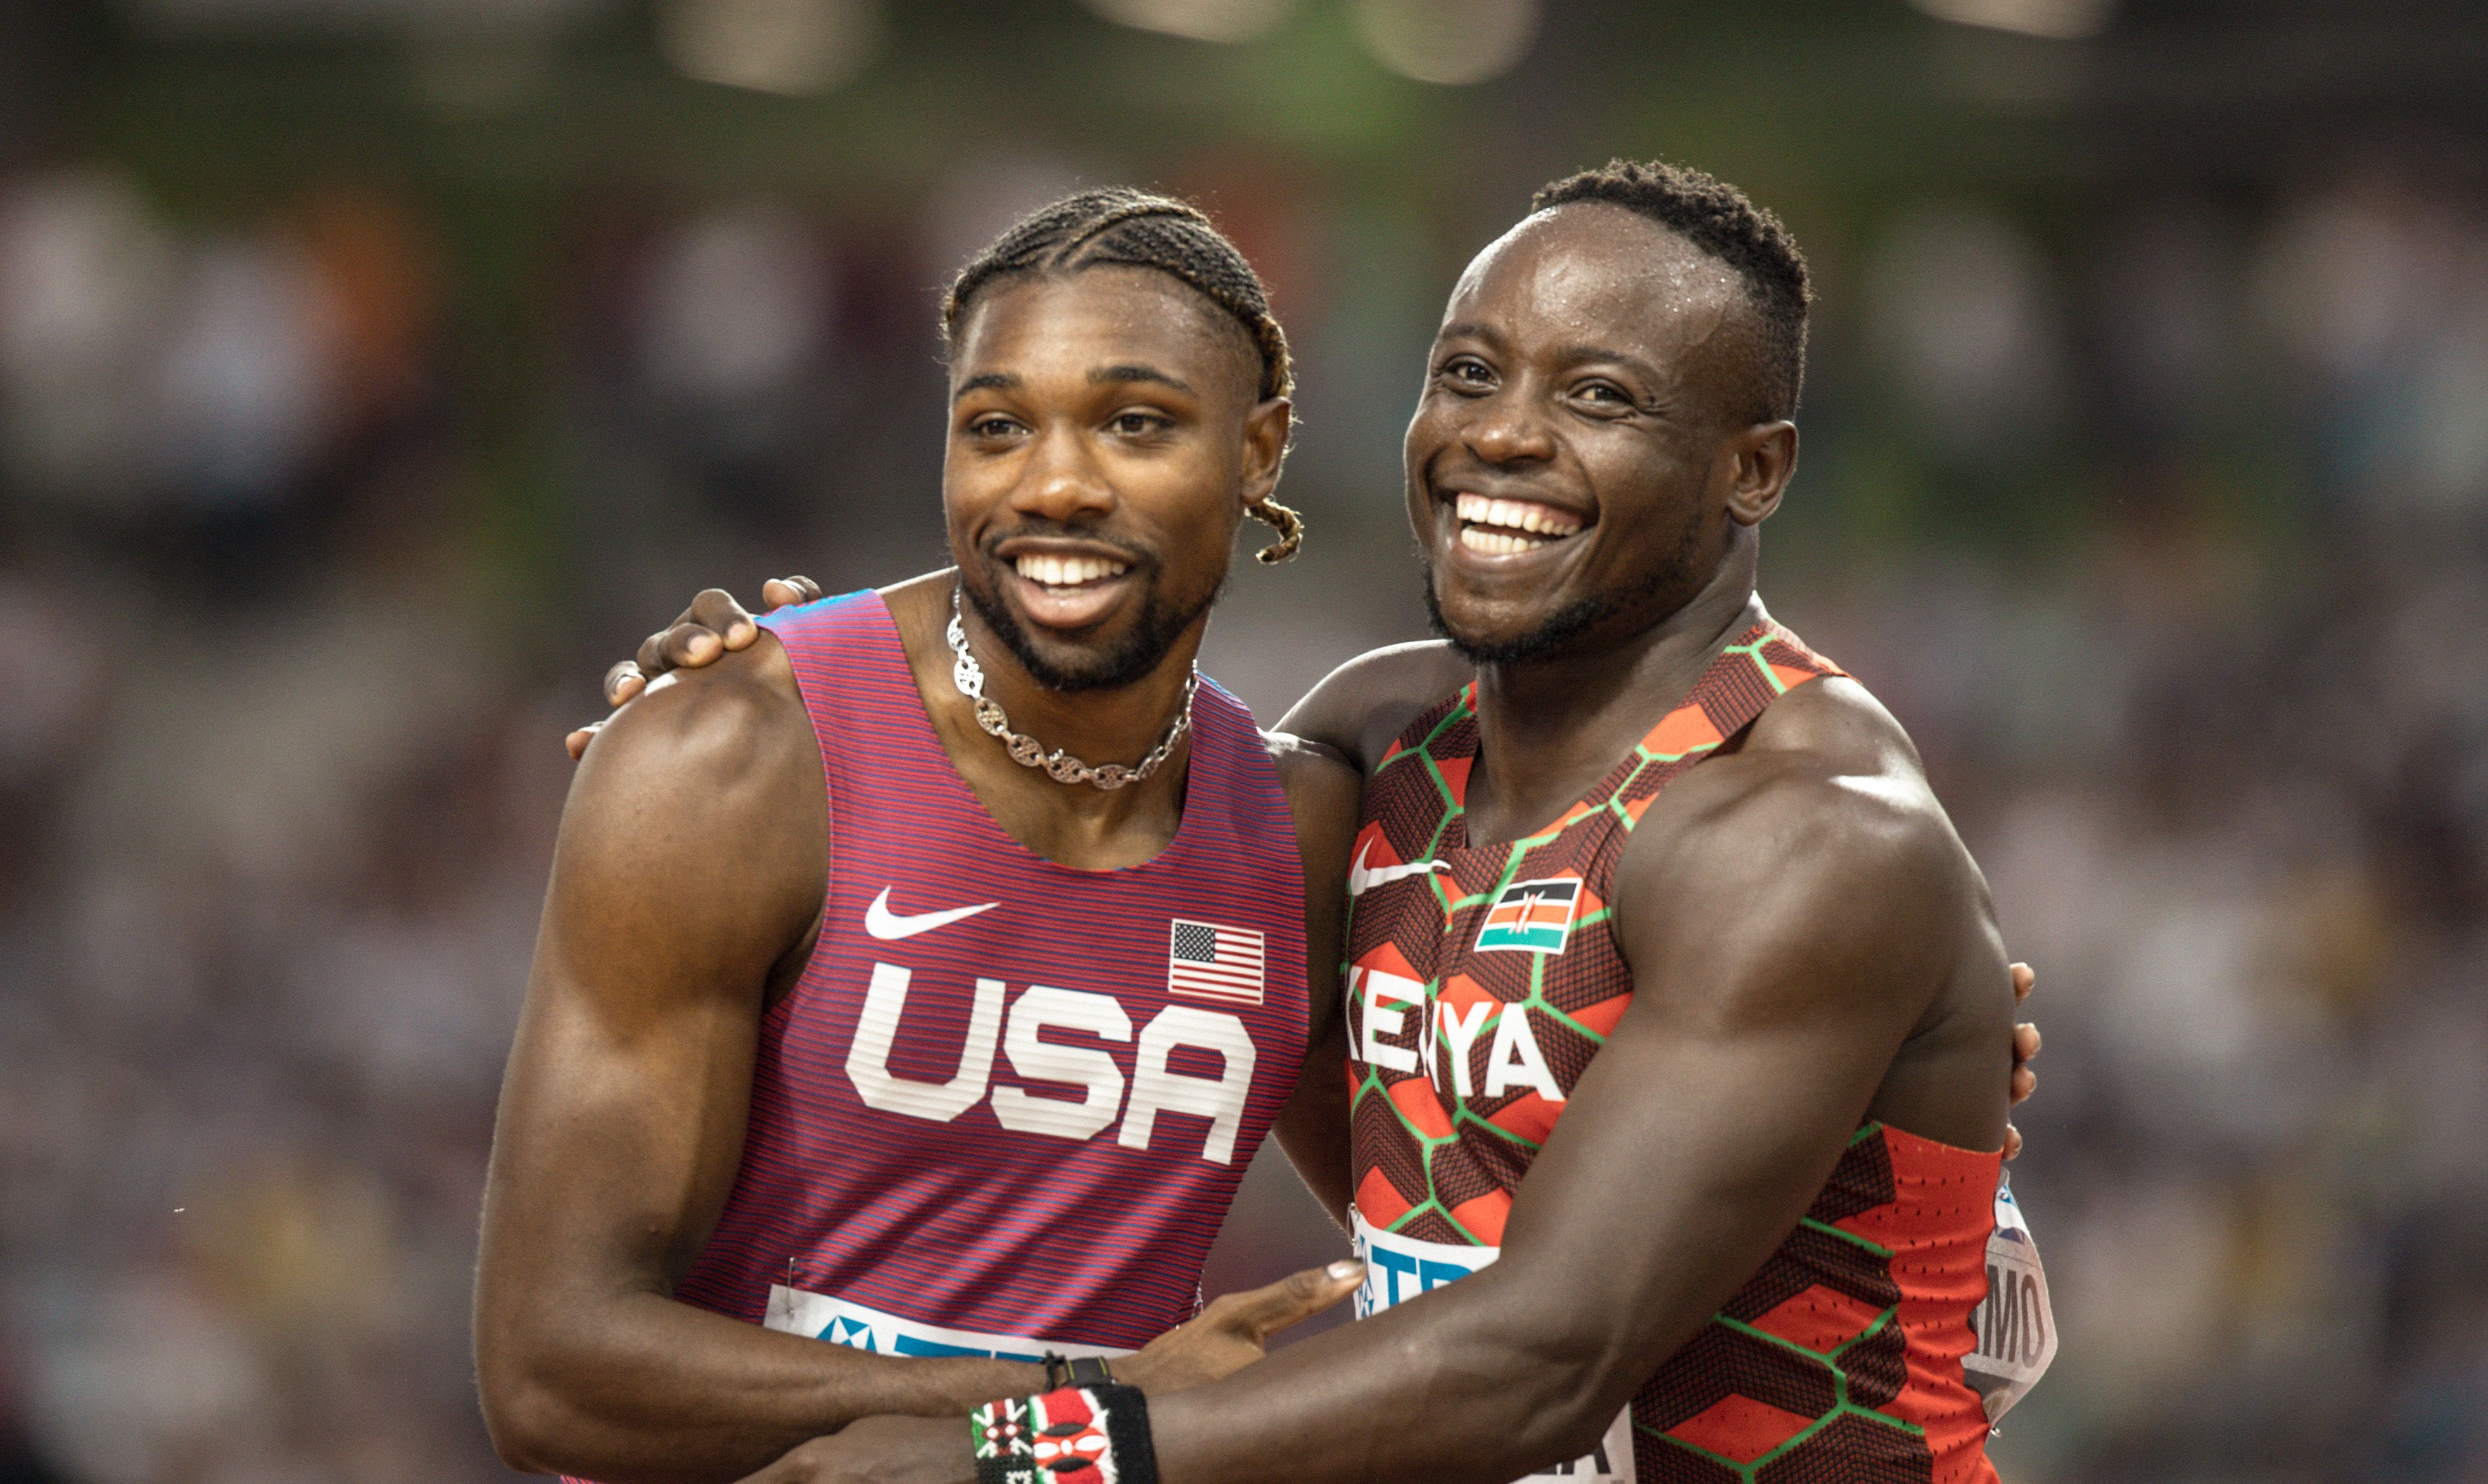 How To Watch The 2023 Prefontaine Classic (Diamond League Final)